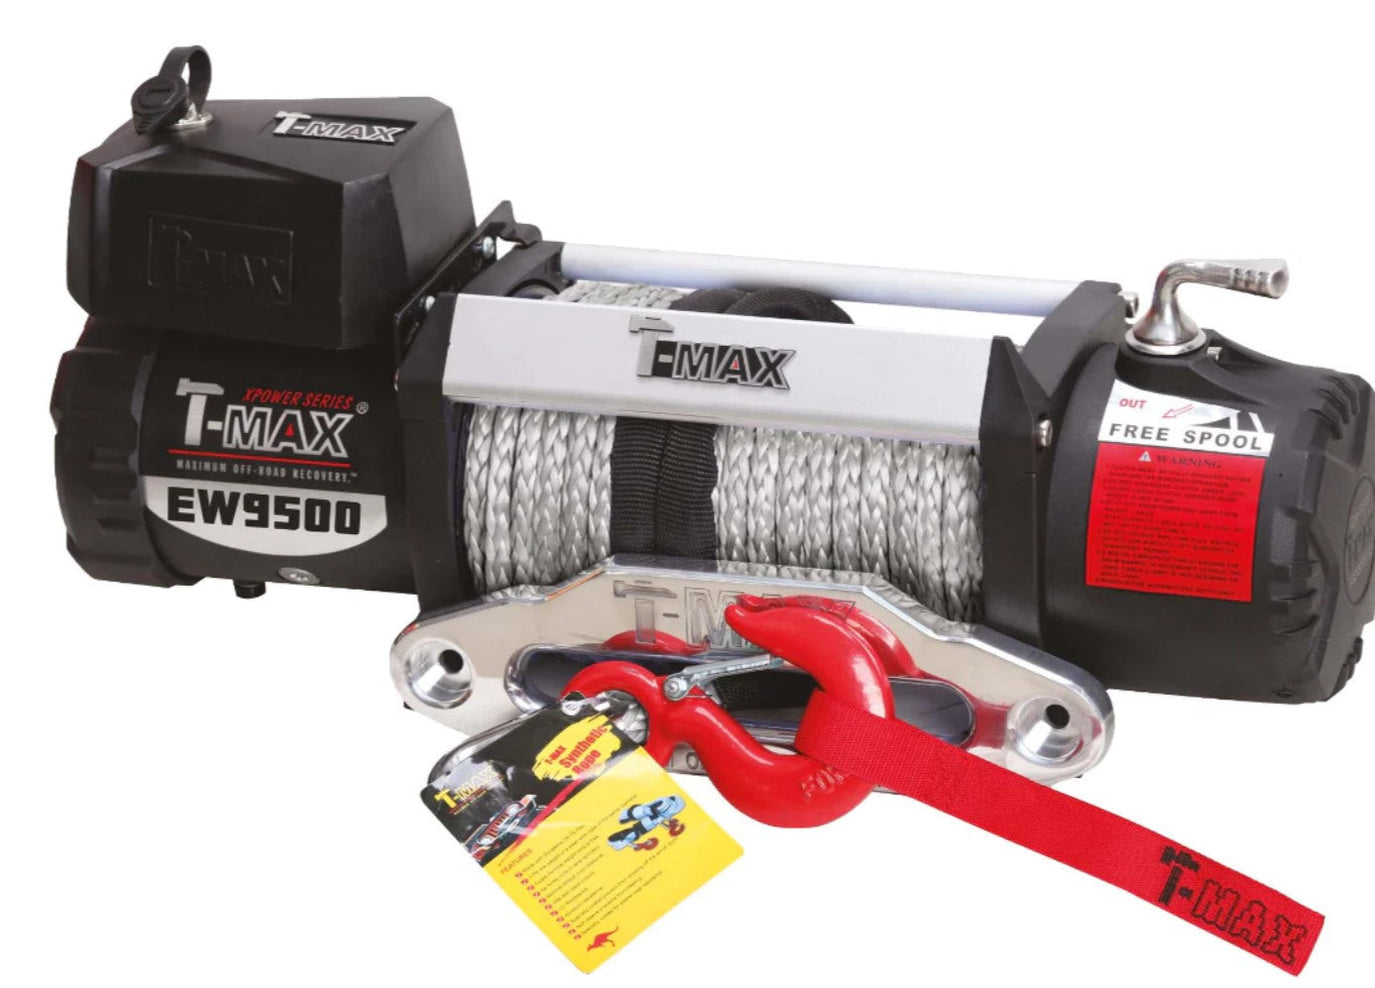 T-Max x power 9500 synthetic rope winch for 4x4s